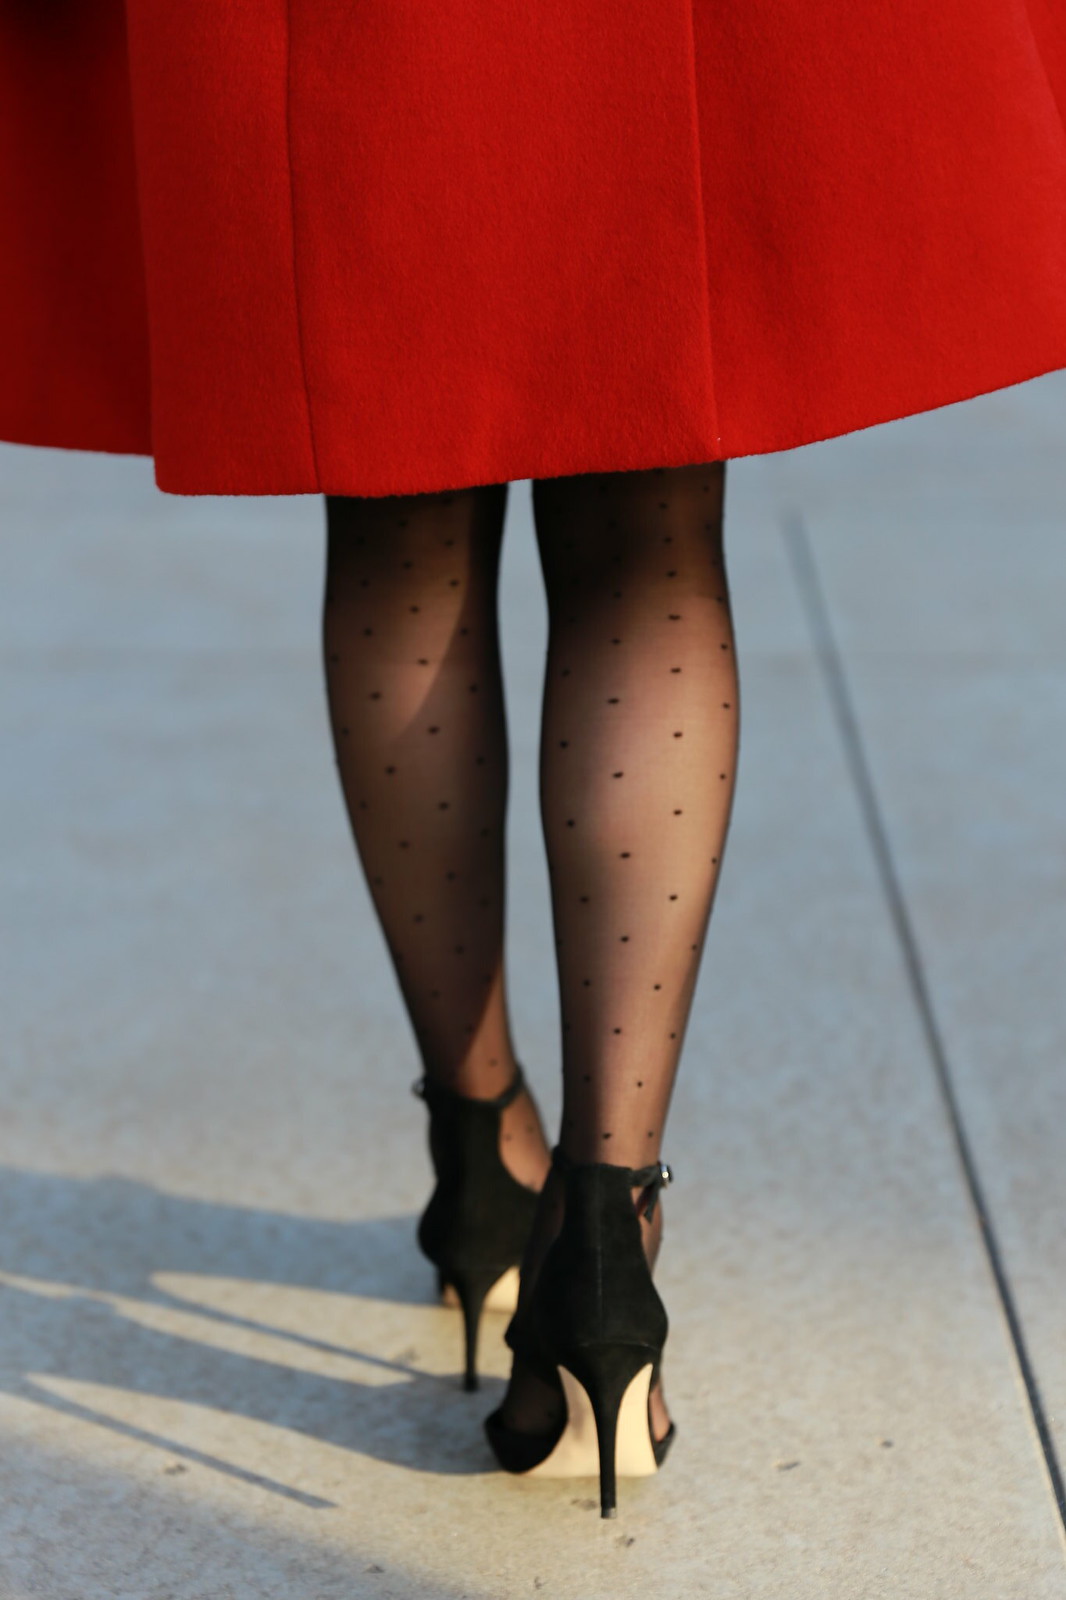 Red Statement Coat + Bow Details